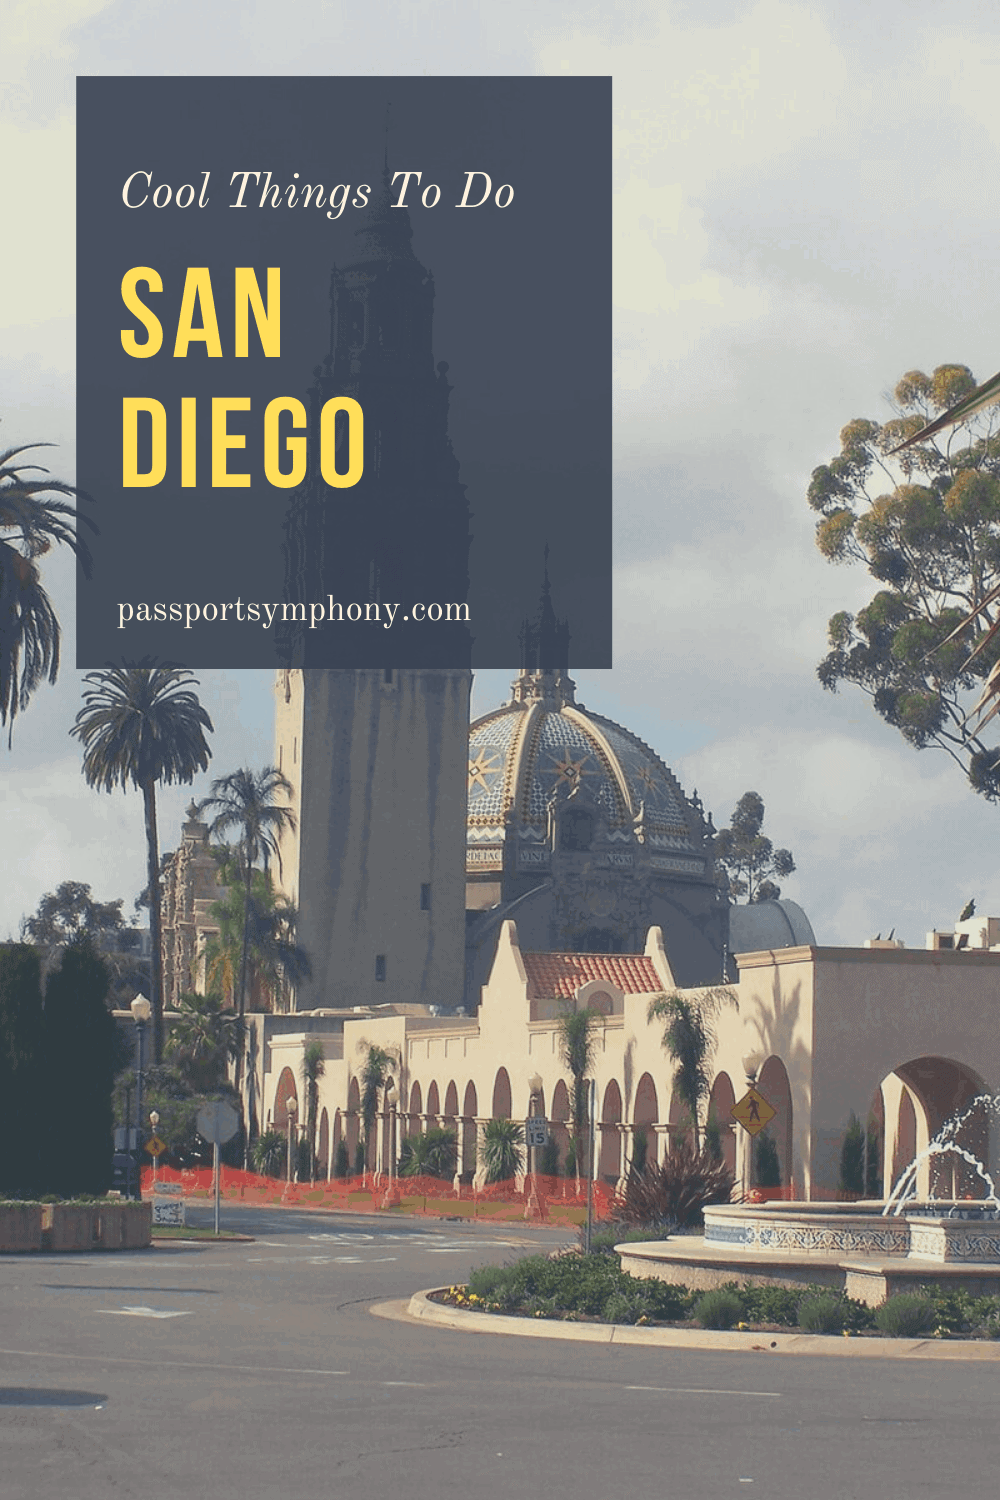 What is unique to San Diego?